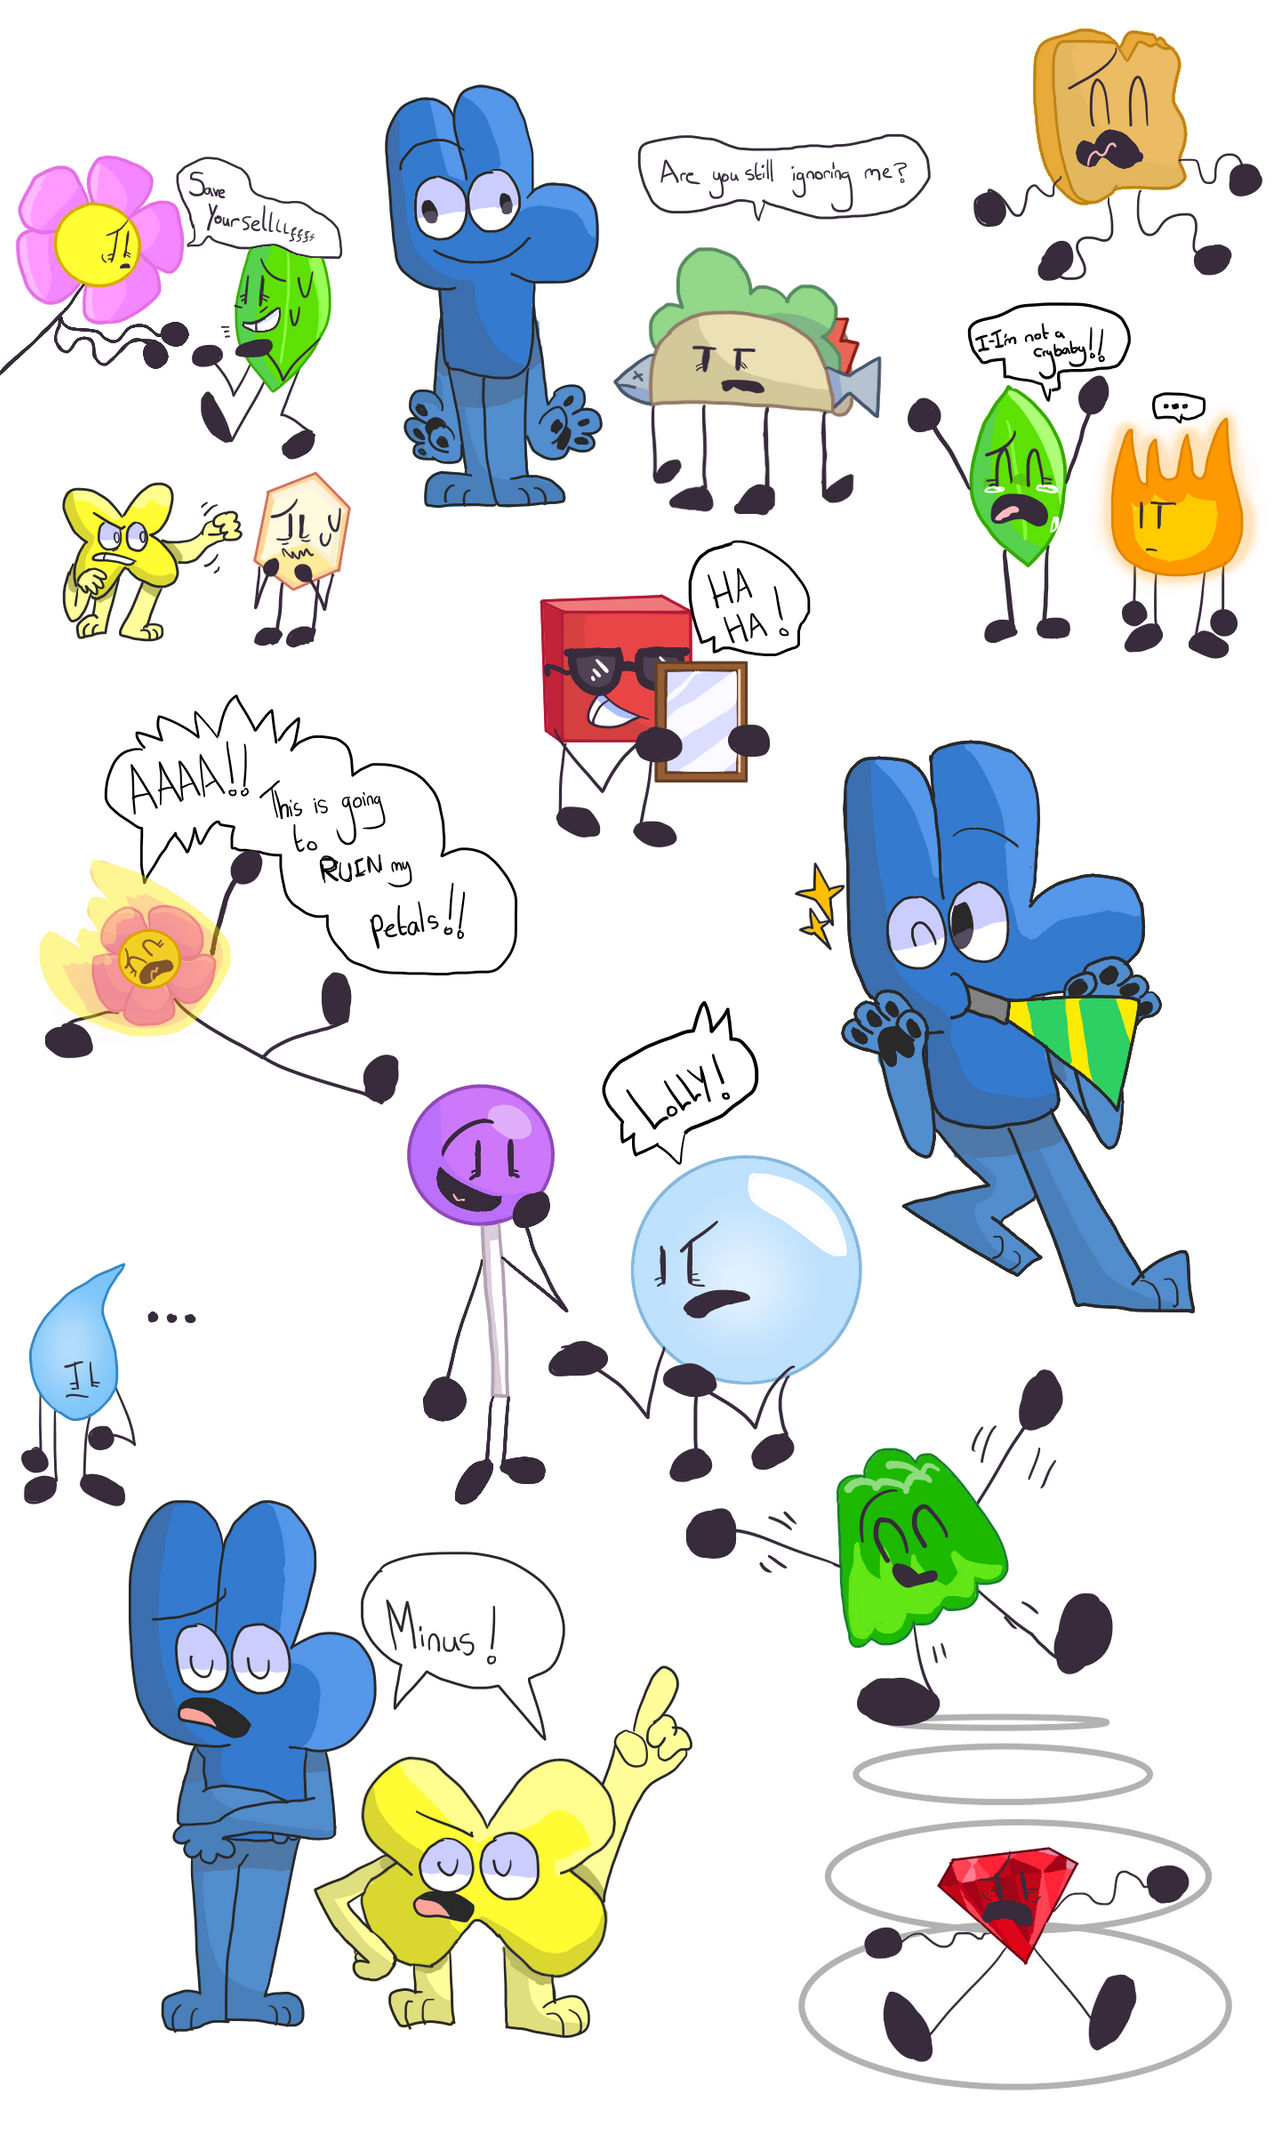 Bfb 20!-weird doodle sheet by smartie-animations on DeviantArt